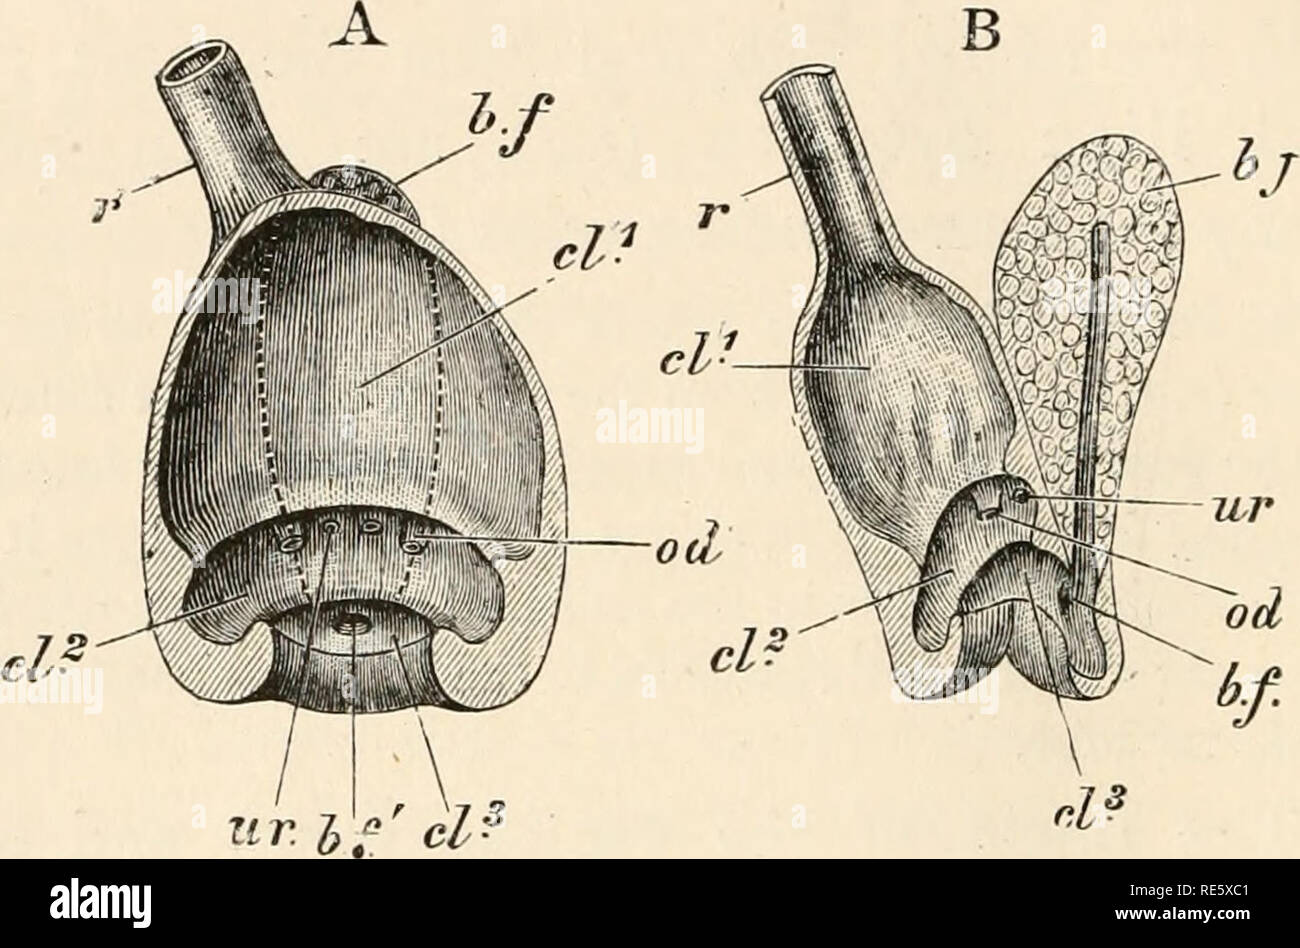 . A course of instruction in zootomy (vertebrata). Anatomy, Comparative. 236 ZOOTOMY. 231. In the male the genital papillae (Fig. 52, v.d') conical elevations just external to the urinary apertures : on their apices are the apertures of the vasa deferentia. 232. In the female the aperture of the left oviduct (Fig. 53, l.od'}, a considerable opening just external to that of the left ureter: the rudimentary right oviduct has a. FIG. 55.—Columba livia. The cloaca of a young female. A, opened fro01 the ventral aspect ; B, in longitudinal section (nat. size). b.f, bursa Fabricii: b.f, its opening i Stock Photo